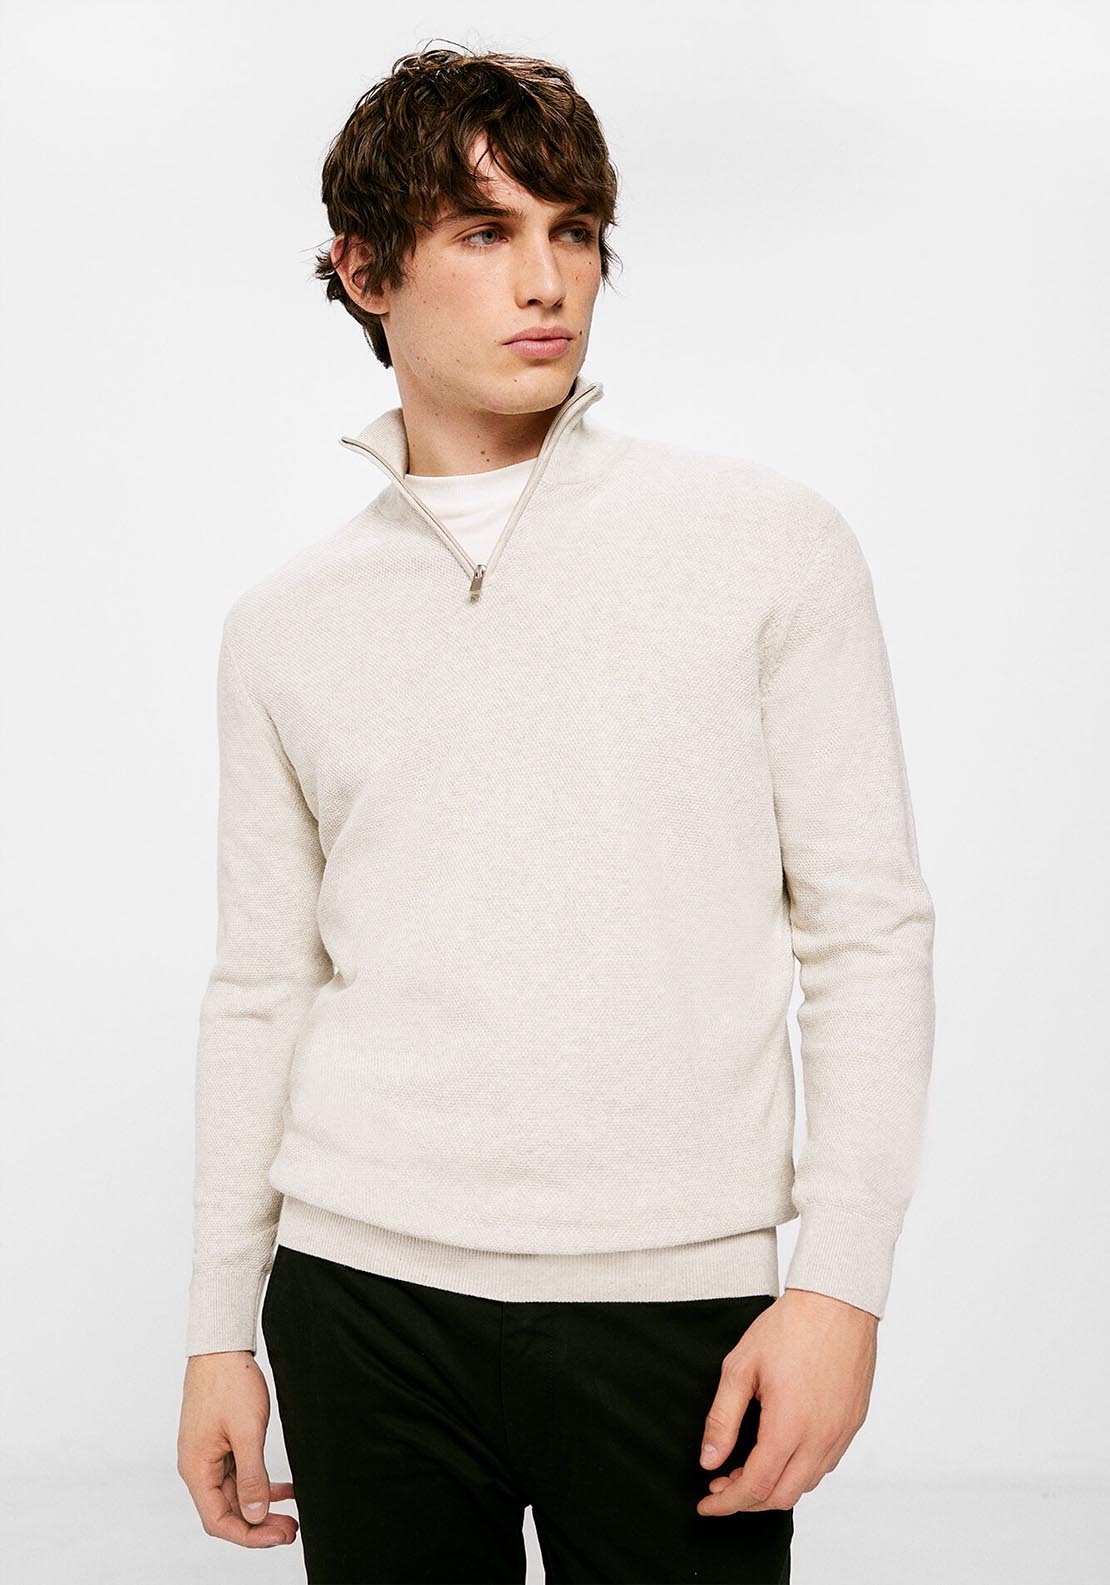 Springfield Structured jumper with zipped collar - Grey / Silver 1 Shaws Department Stores